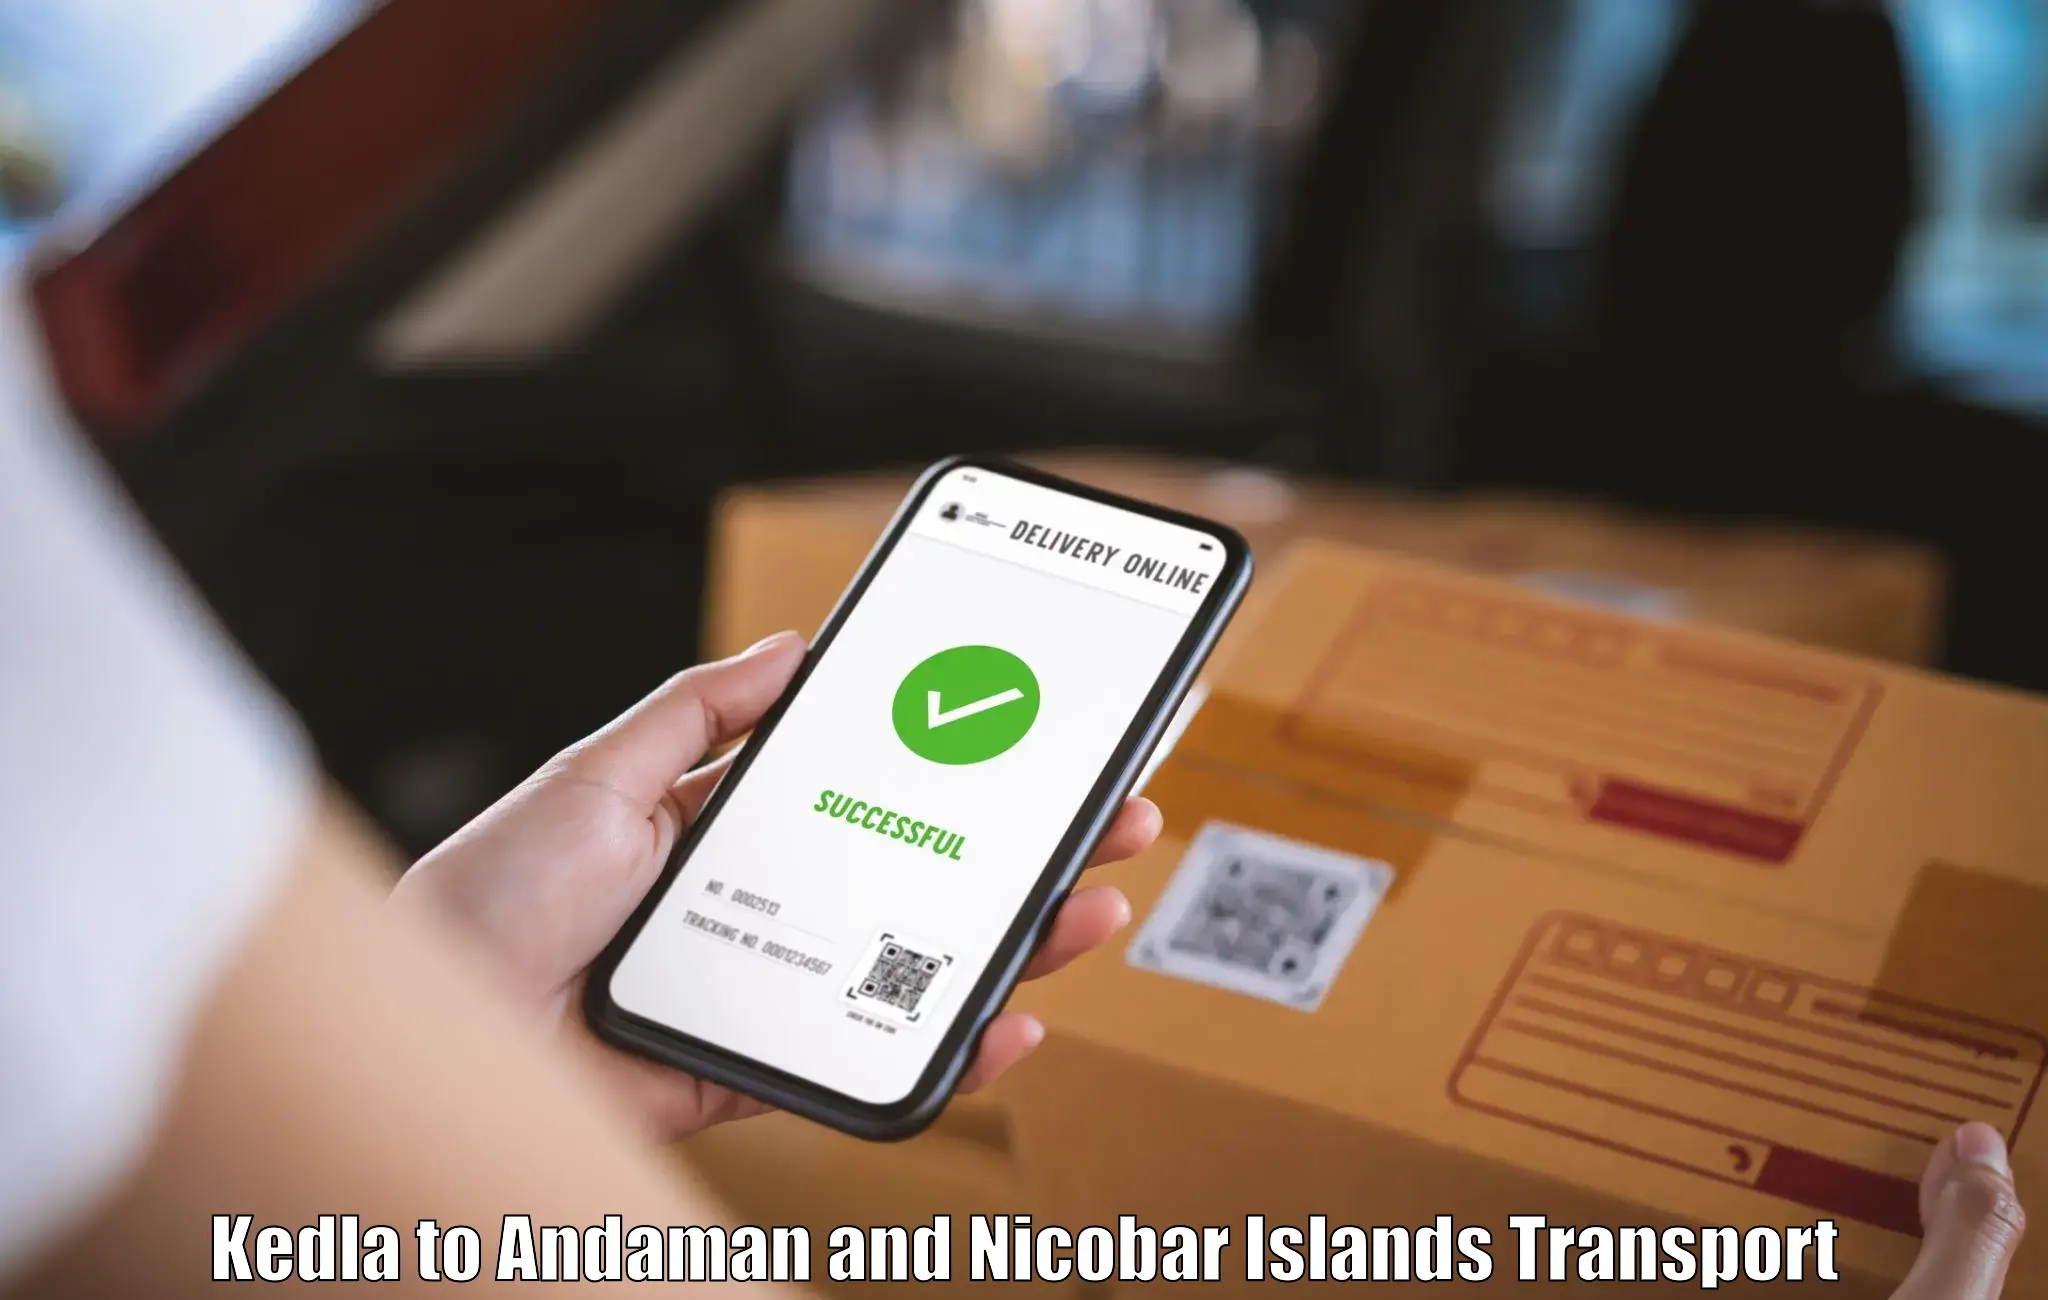 Road transport online services Kedla to Andaman and Nicobar Islands